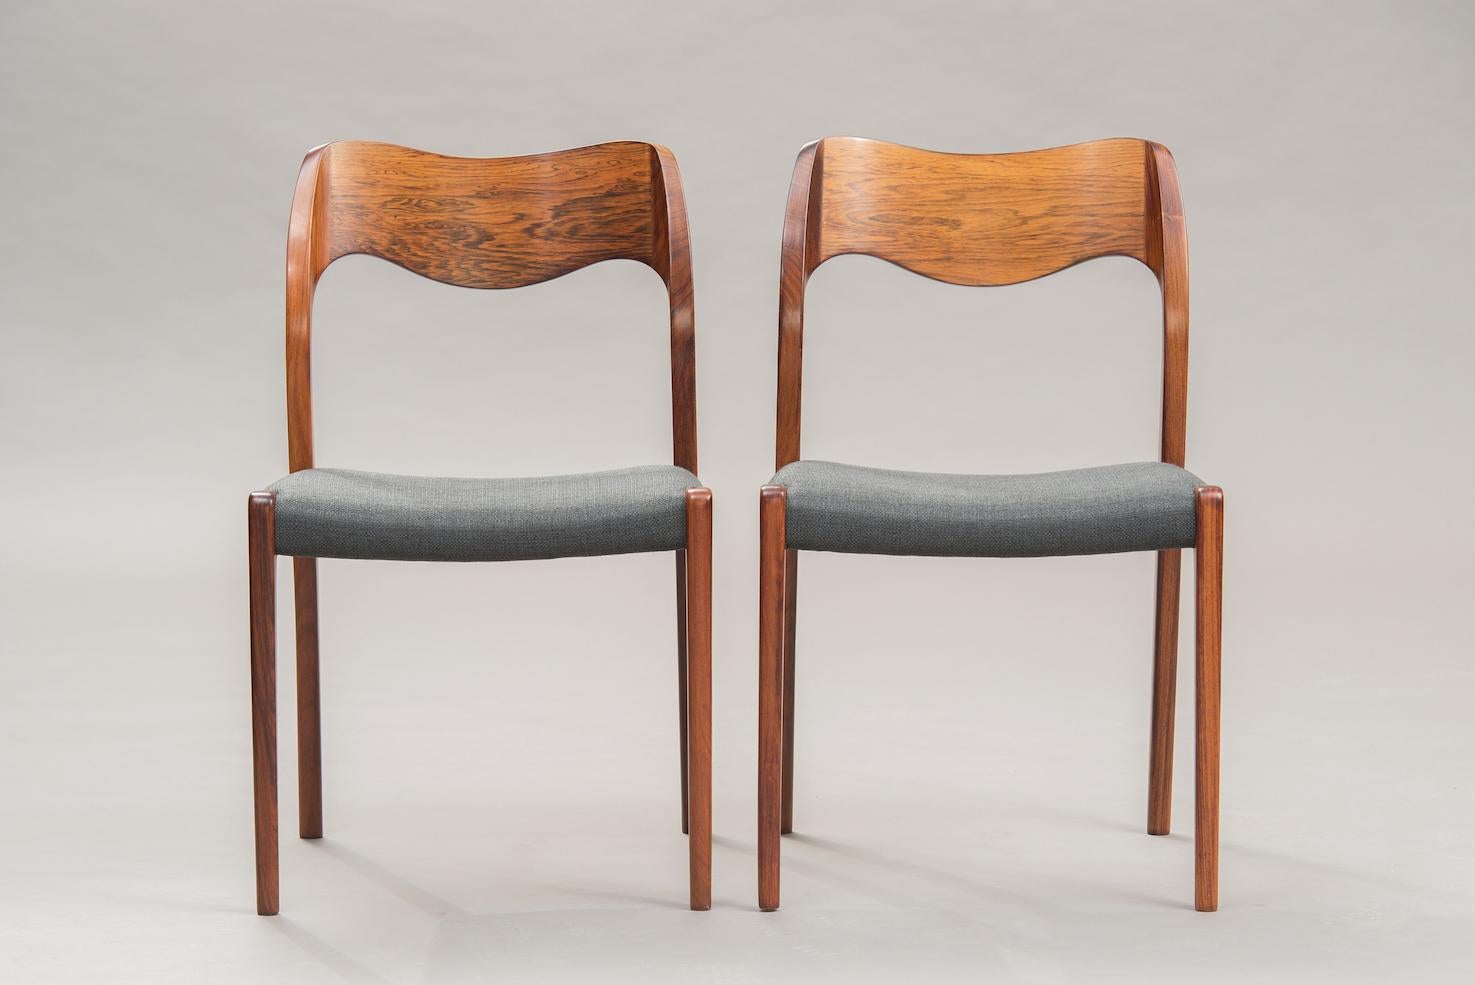 Set of ten rosewood dining chairs, reupholstered in grey fabric, model 71.
Fully restored items, handmade varnished by our own team of craftsmen, new grey fabric upholstery.